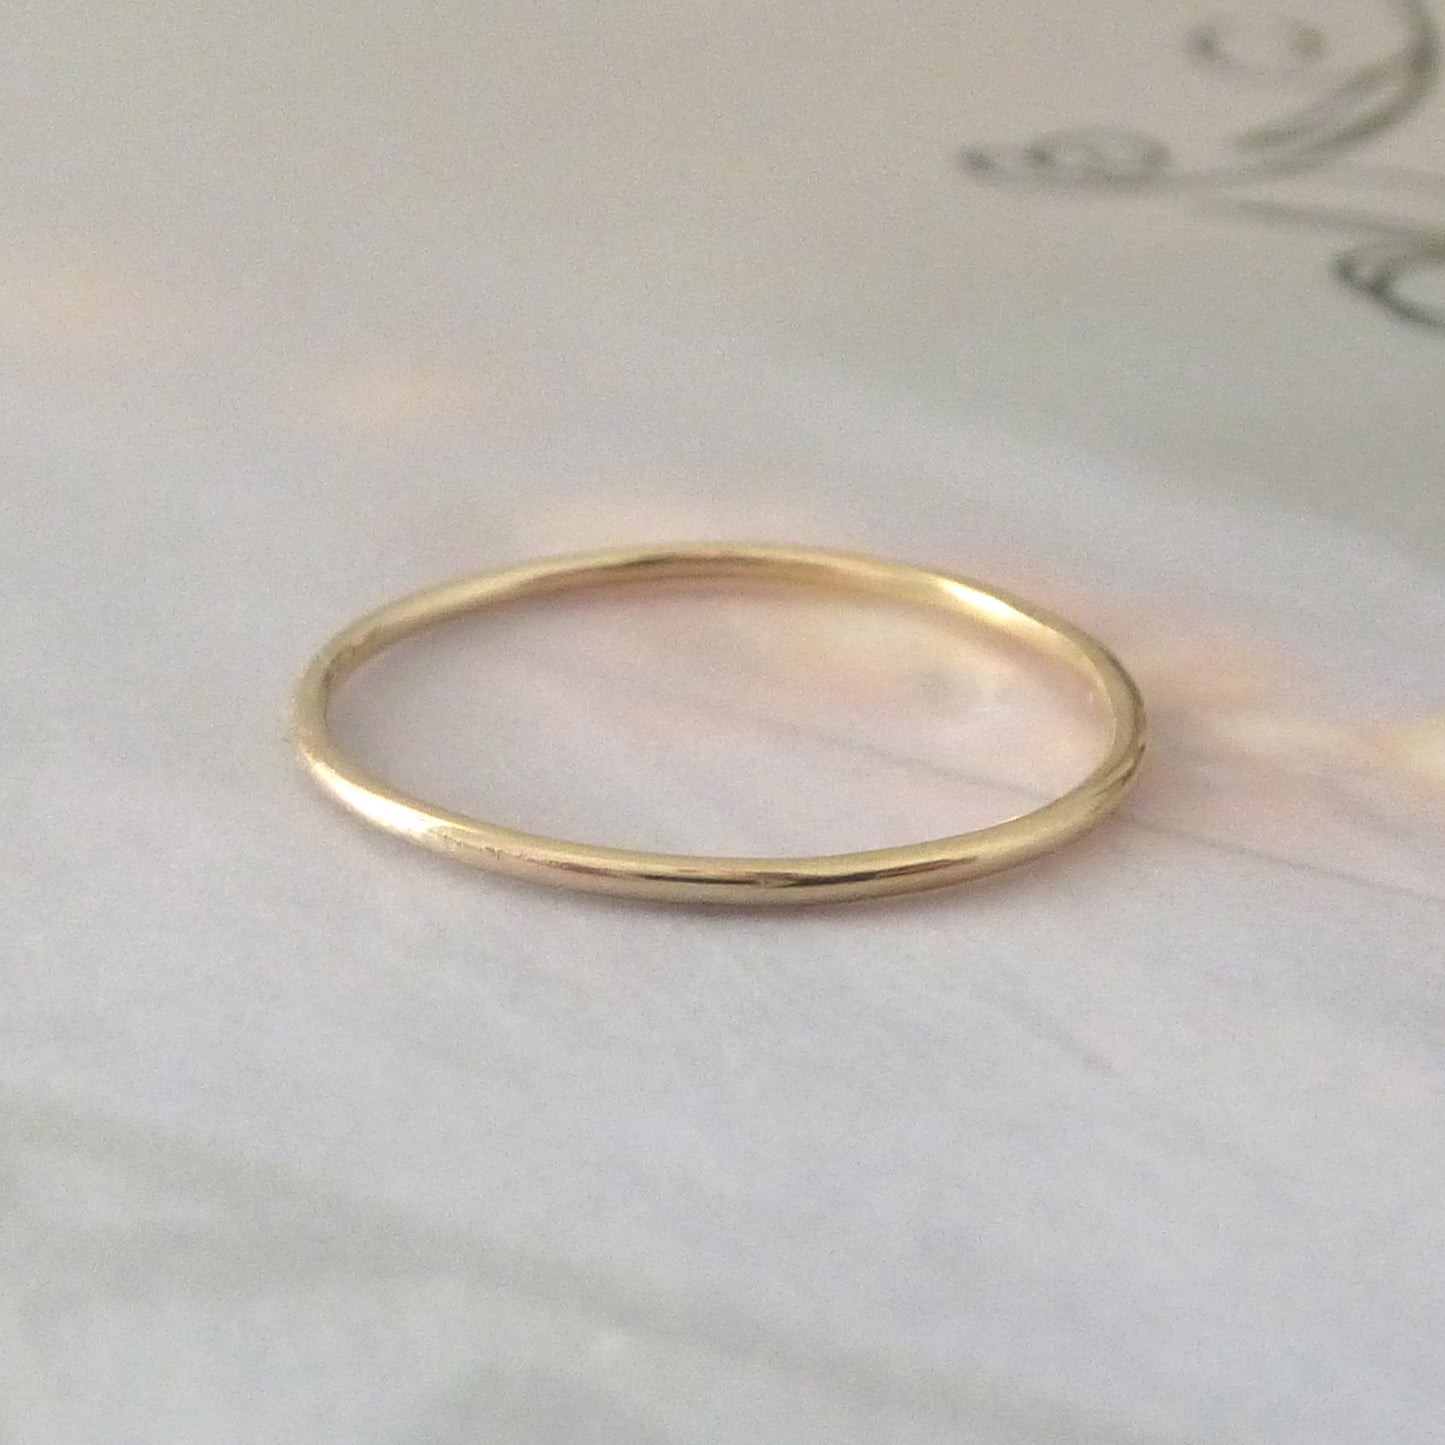 Skinny smooth band ring - 9ct yellow gold